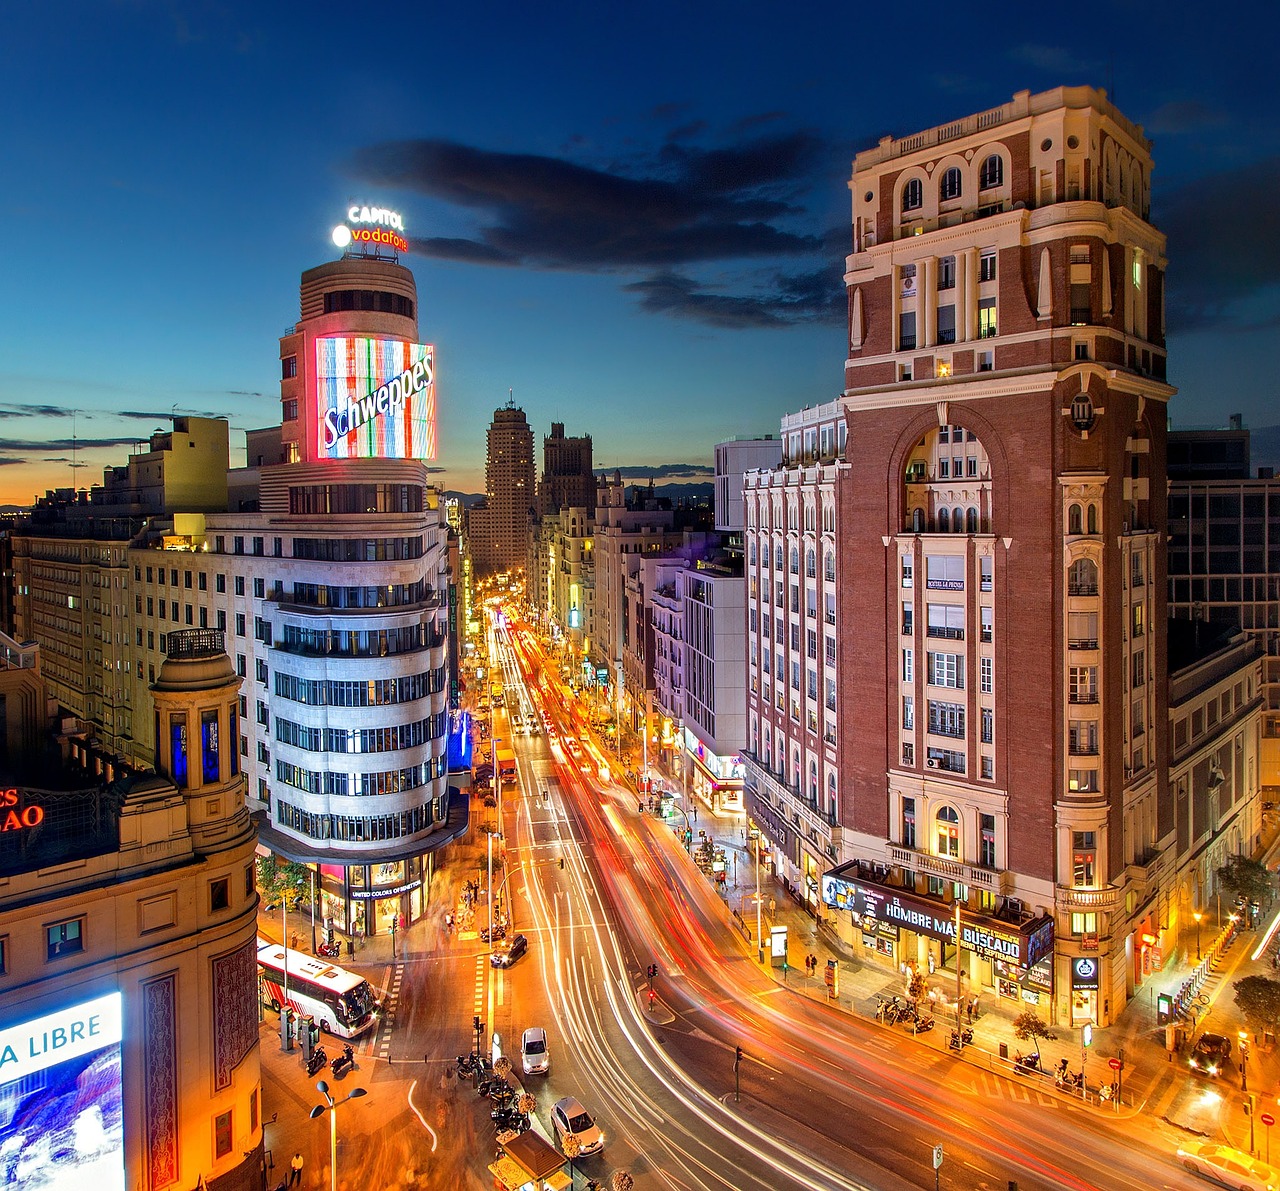 Madrid's Royal Heritage and Gastronomic Gems